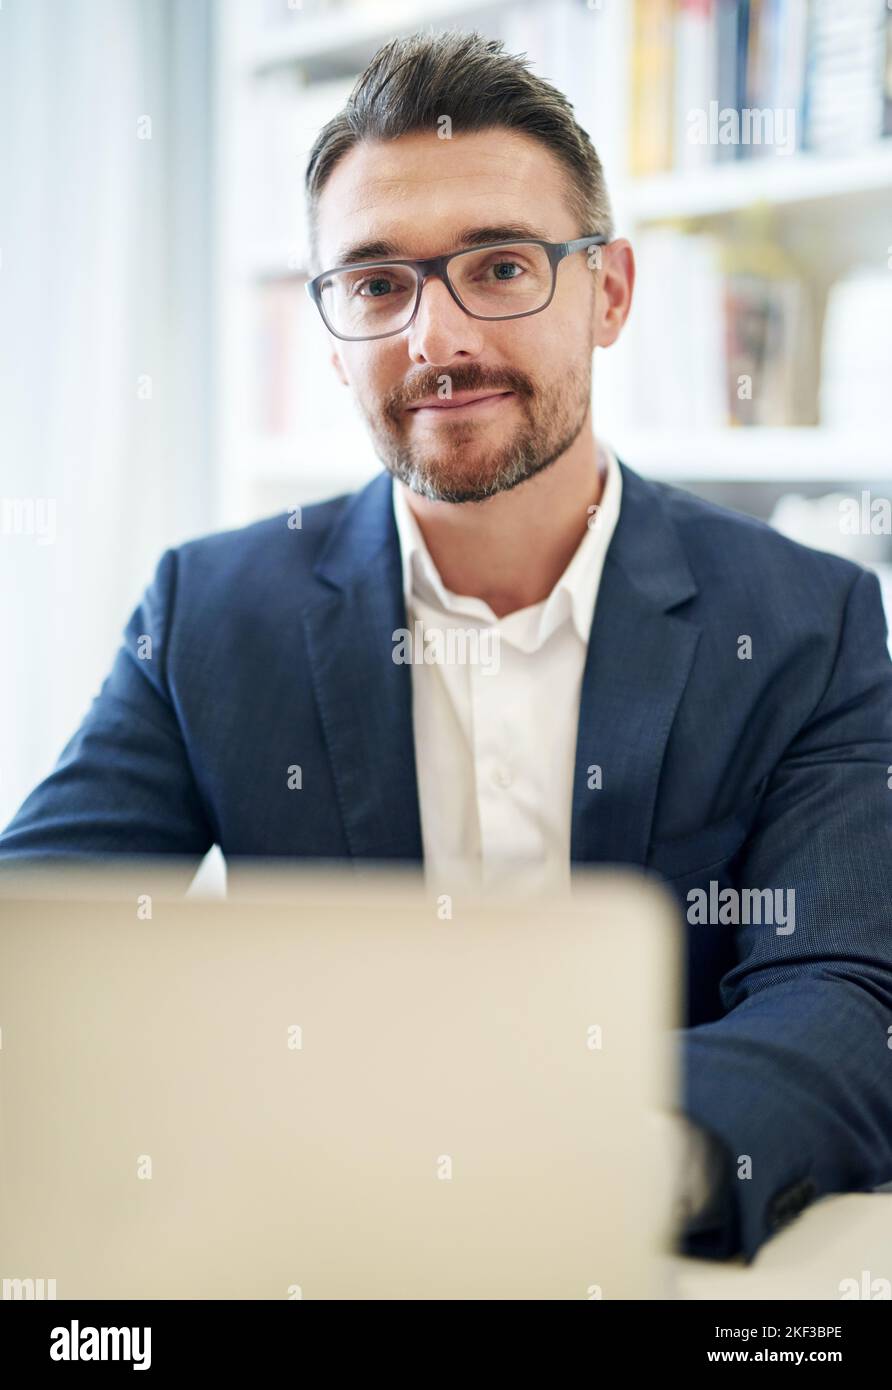 Tackling his work with a can-do attitude. Cropped portrait of a businessman working in his office. Stock Photo